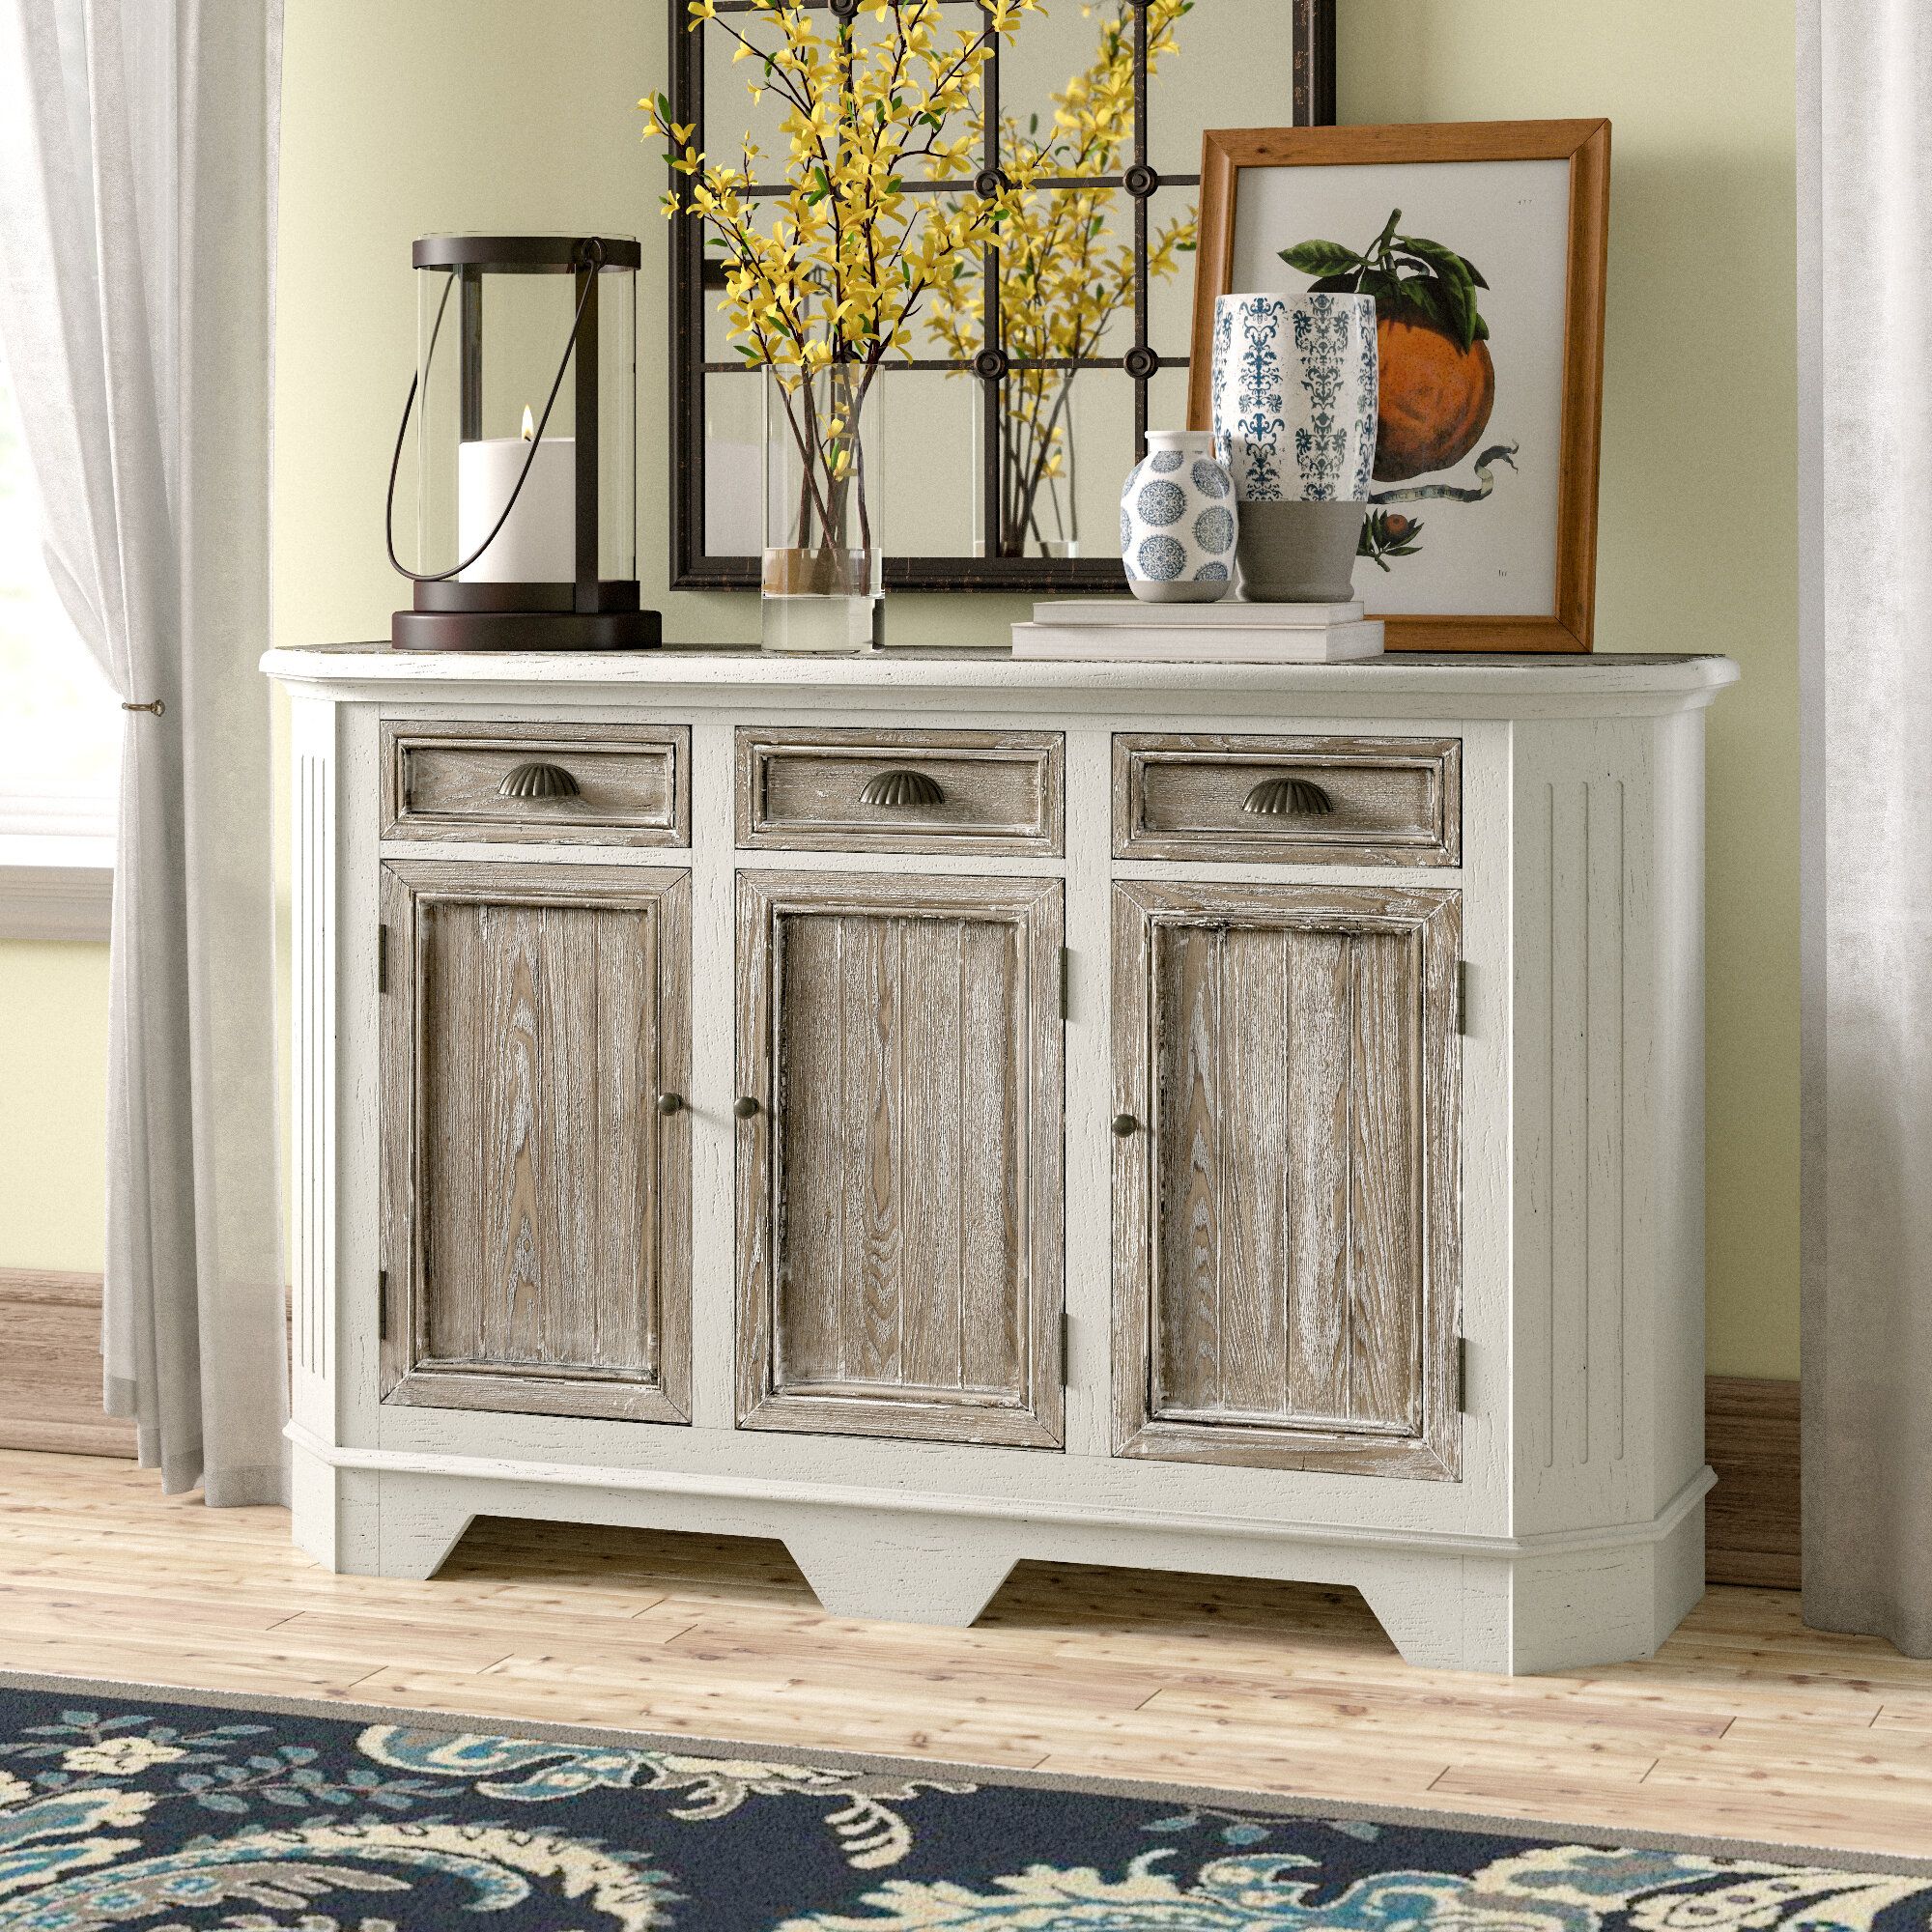 Funkhouser 3 Door 3 Drawer Sideboard With Ilyan Traditional Wood Sideboards (View 23 of 30)